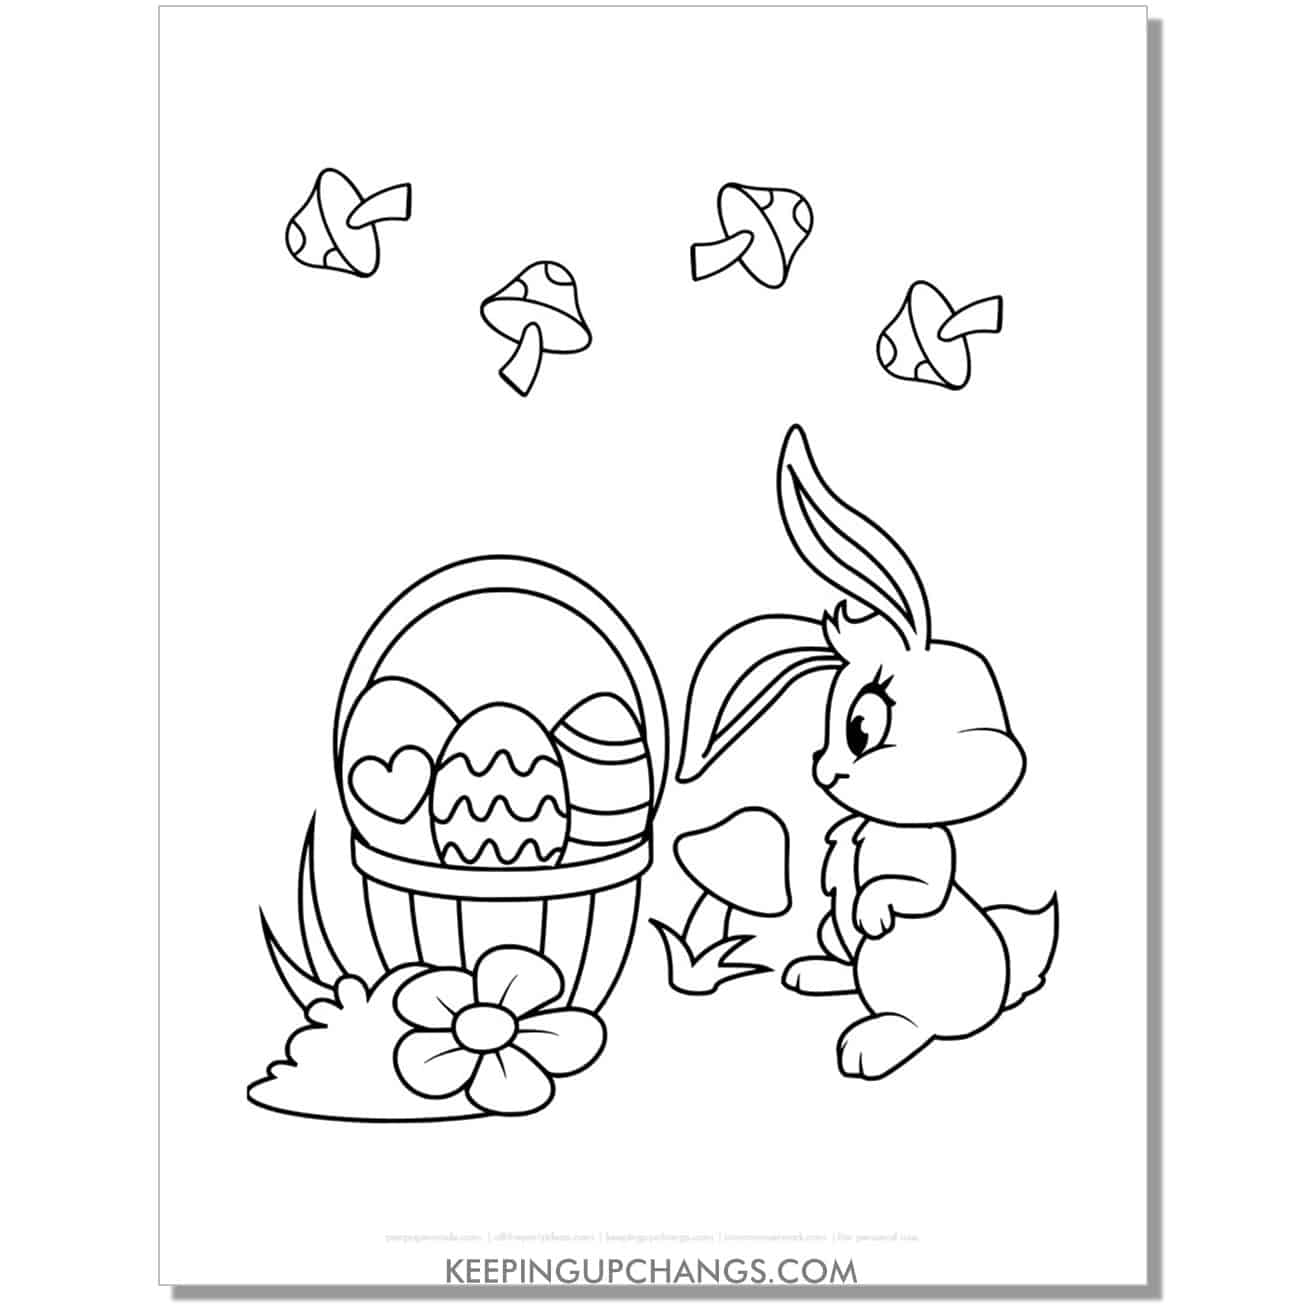 Cute Easter rabbit profile with Easter basket, eggs, and mushrooms coloring page, sheet.